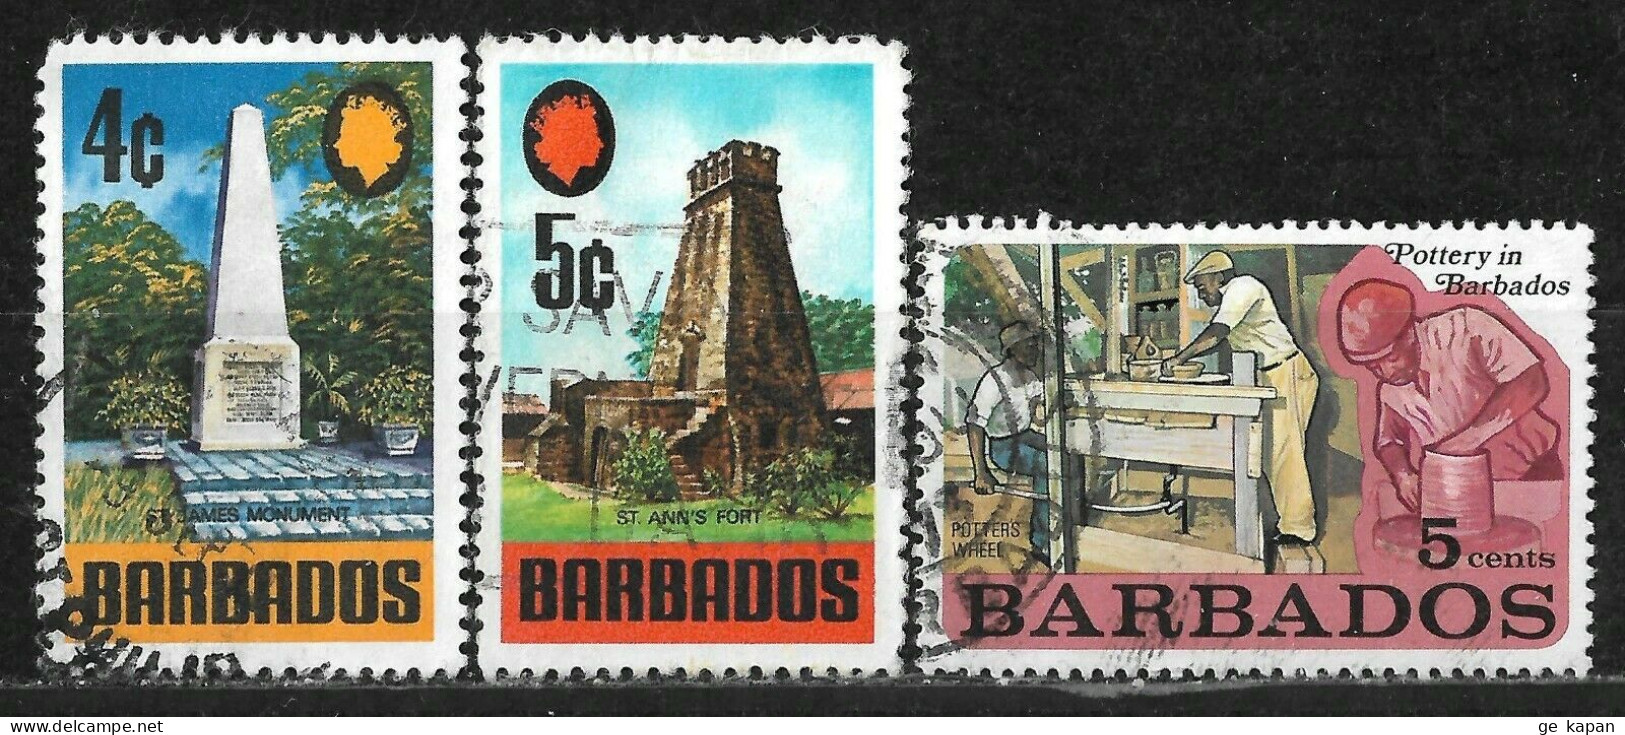 1970,1973 BARBADOS SET OF 3 USED STAMPS (Michel # 300,301,349) - Barbados (1966-...)